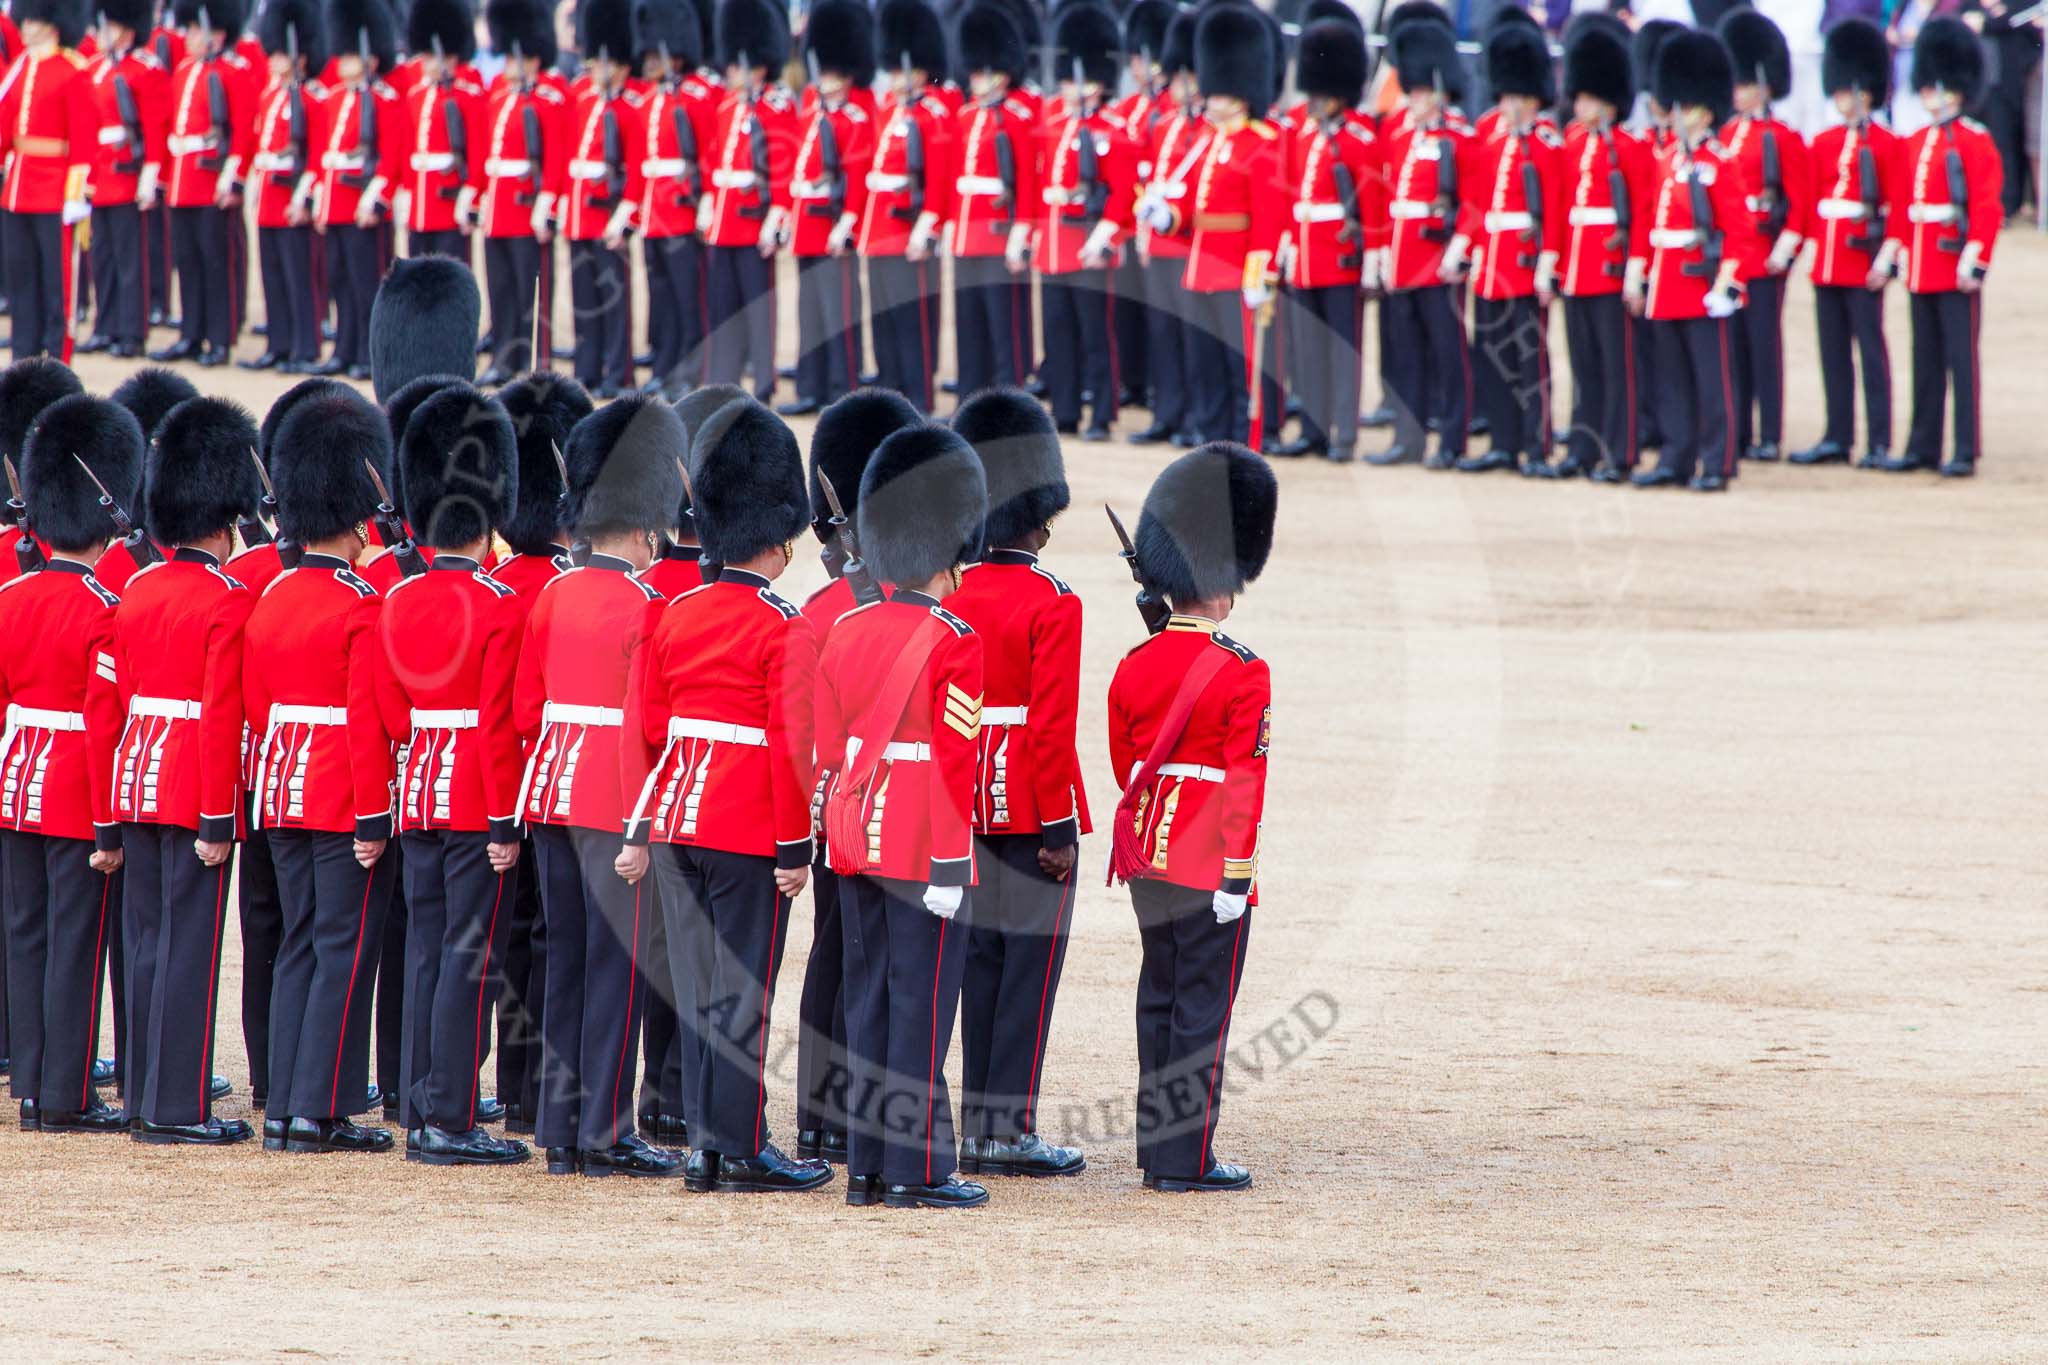 Trooping the Colour 2013: No. 1 Guard (Escort for the Colour),1st Battalion Welsh Guards is ready and in position to receive the Colour. Image #447, 15 June 2013 11:19 Horse Guards Parade, London, UK